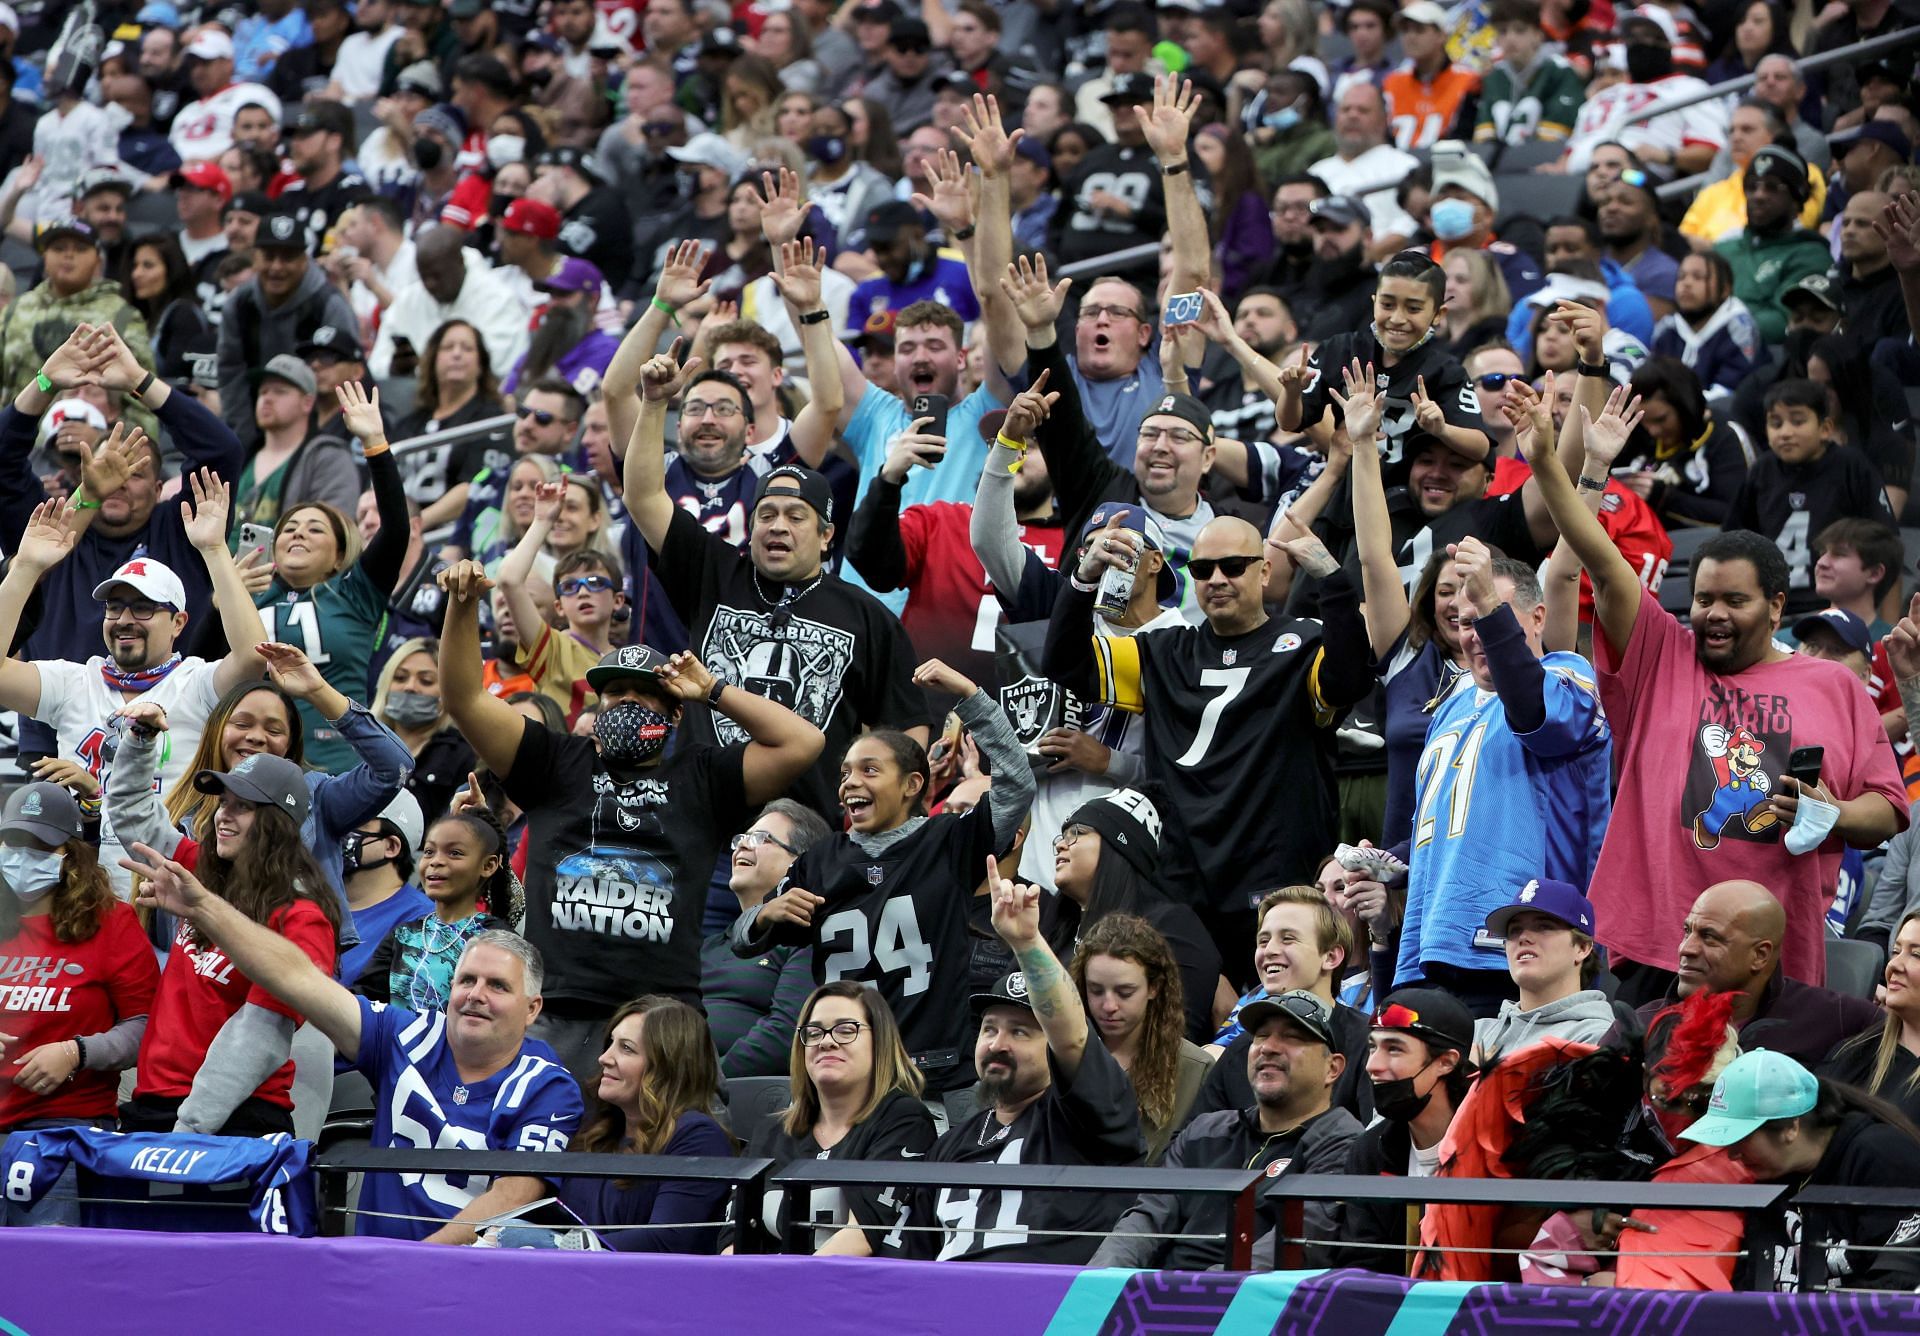 Fans at the NFL Pro Bowl on February 6, 2022 